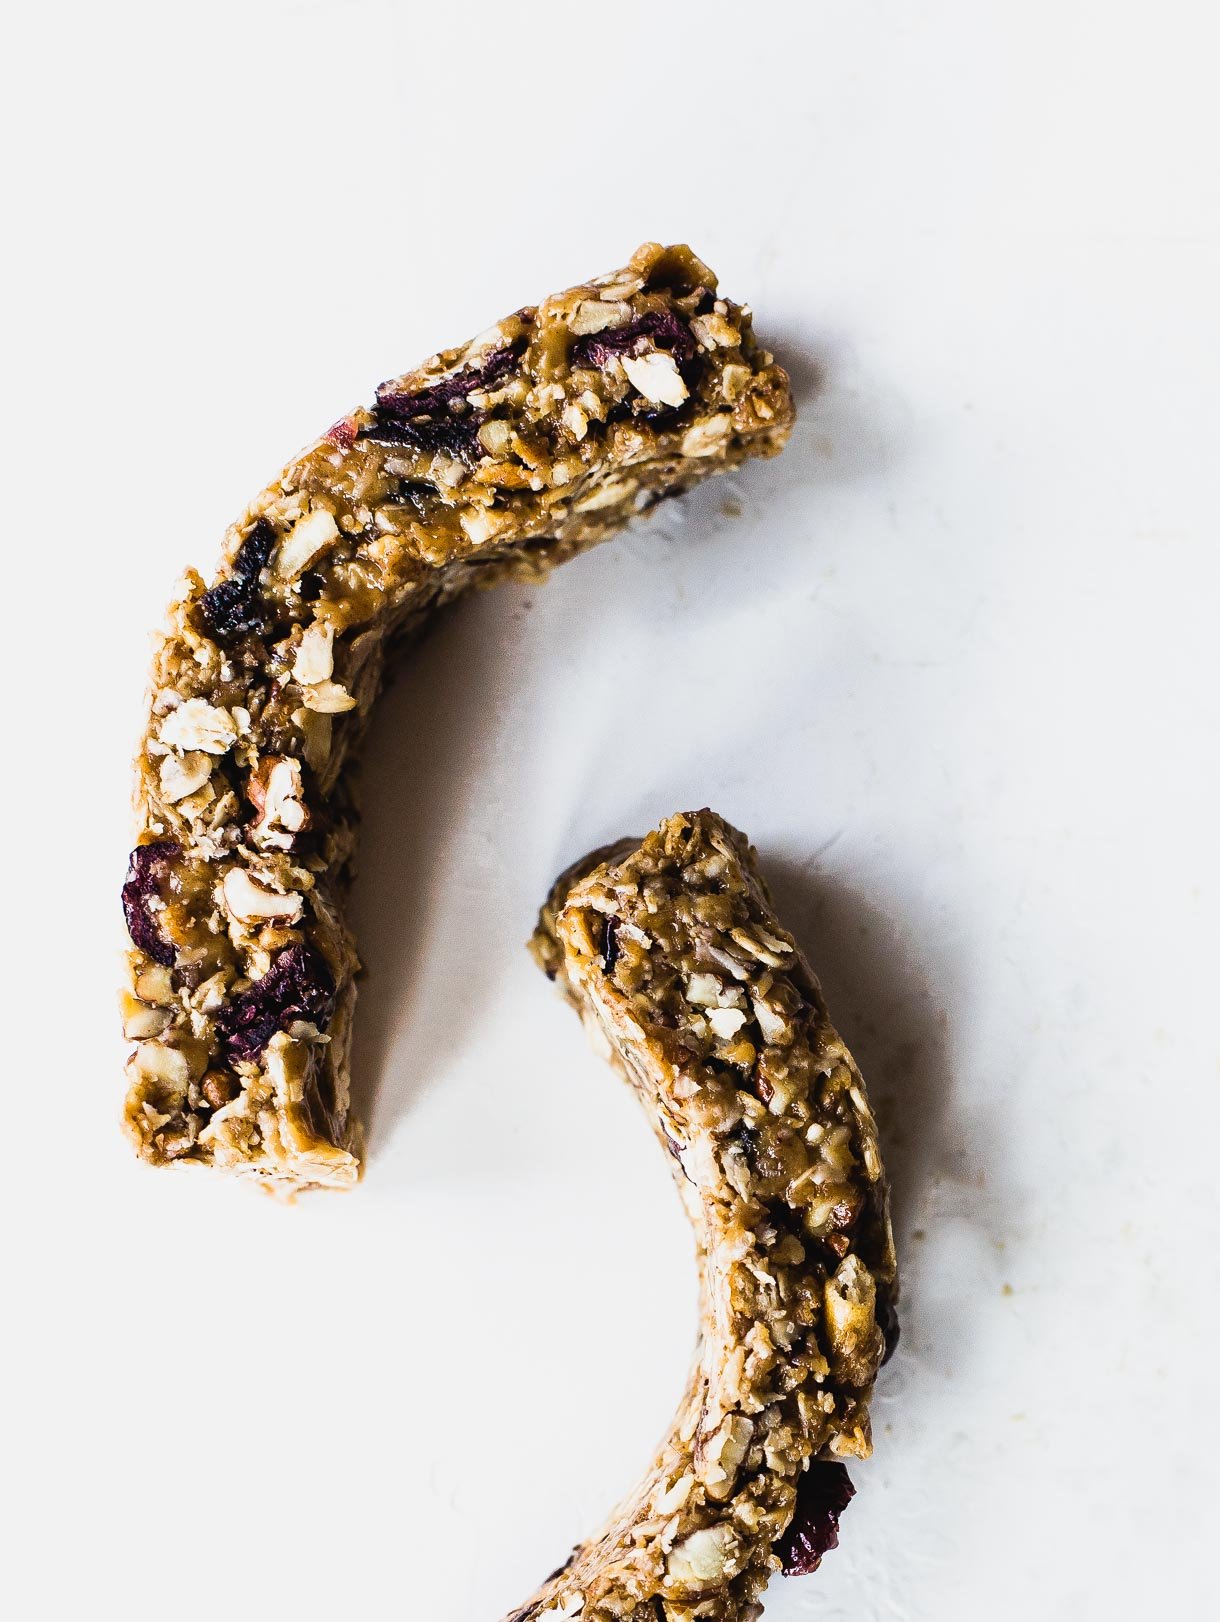 Really Chewy No-Bake Peanut Butter Granola Bars {made with brown rice syrup & honey, gluten-free, easy to make} #chewygranolabars